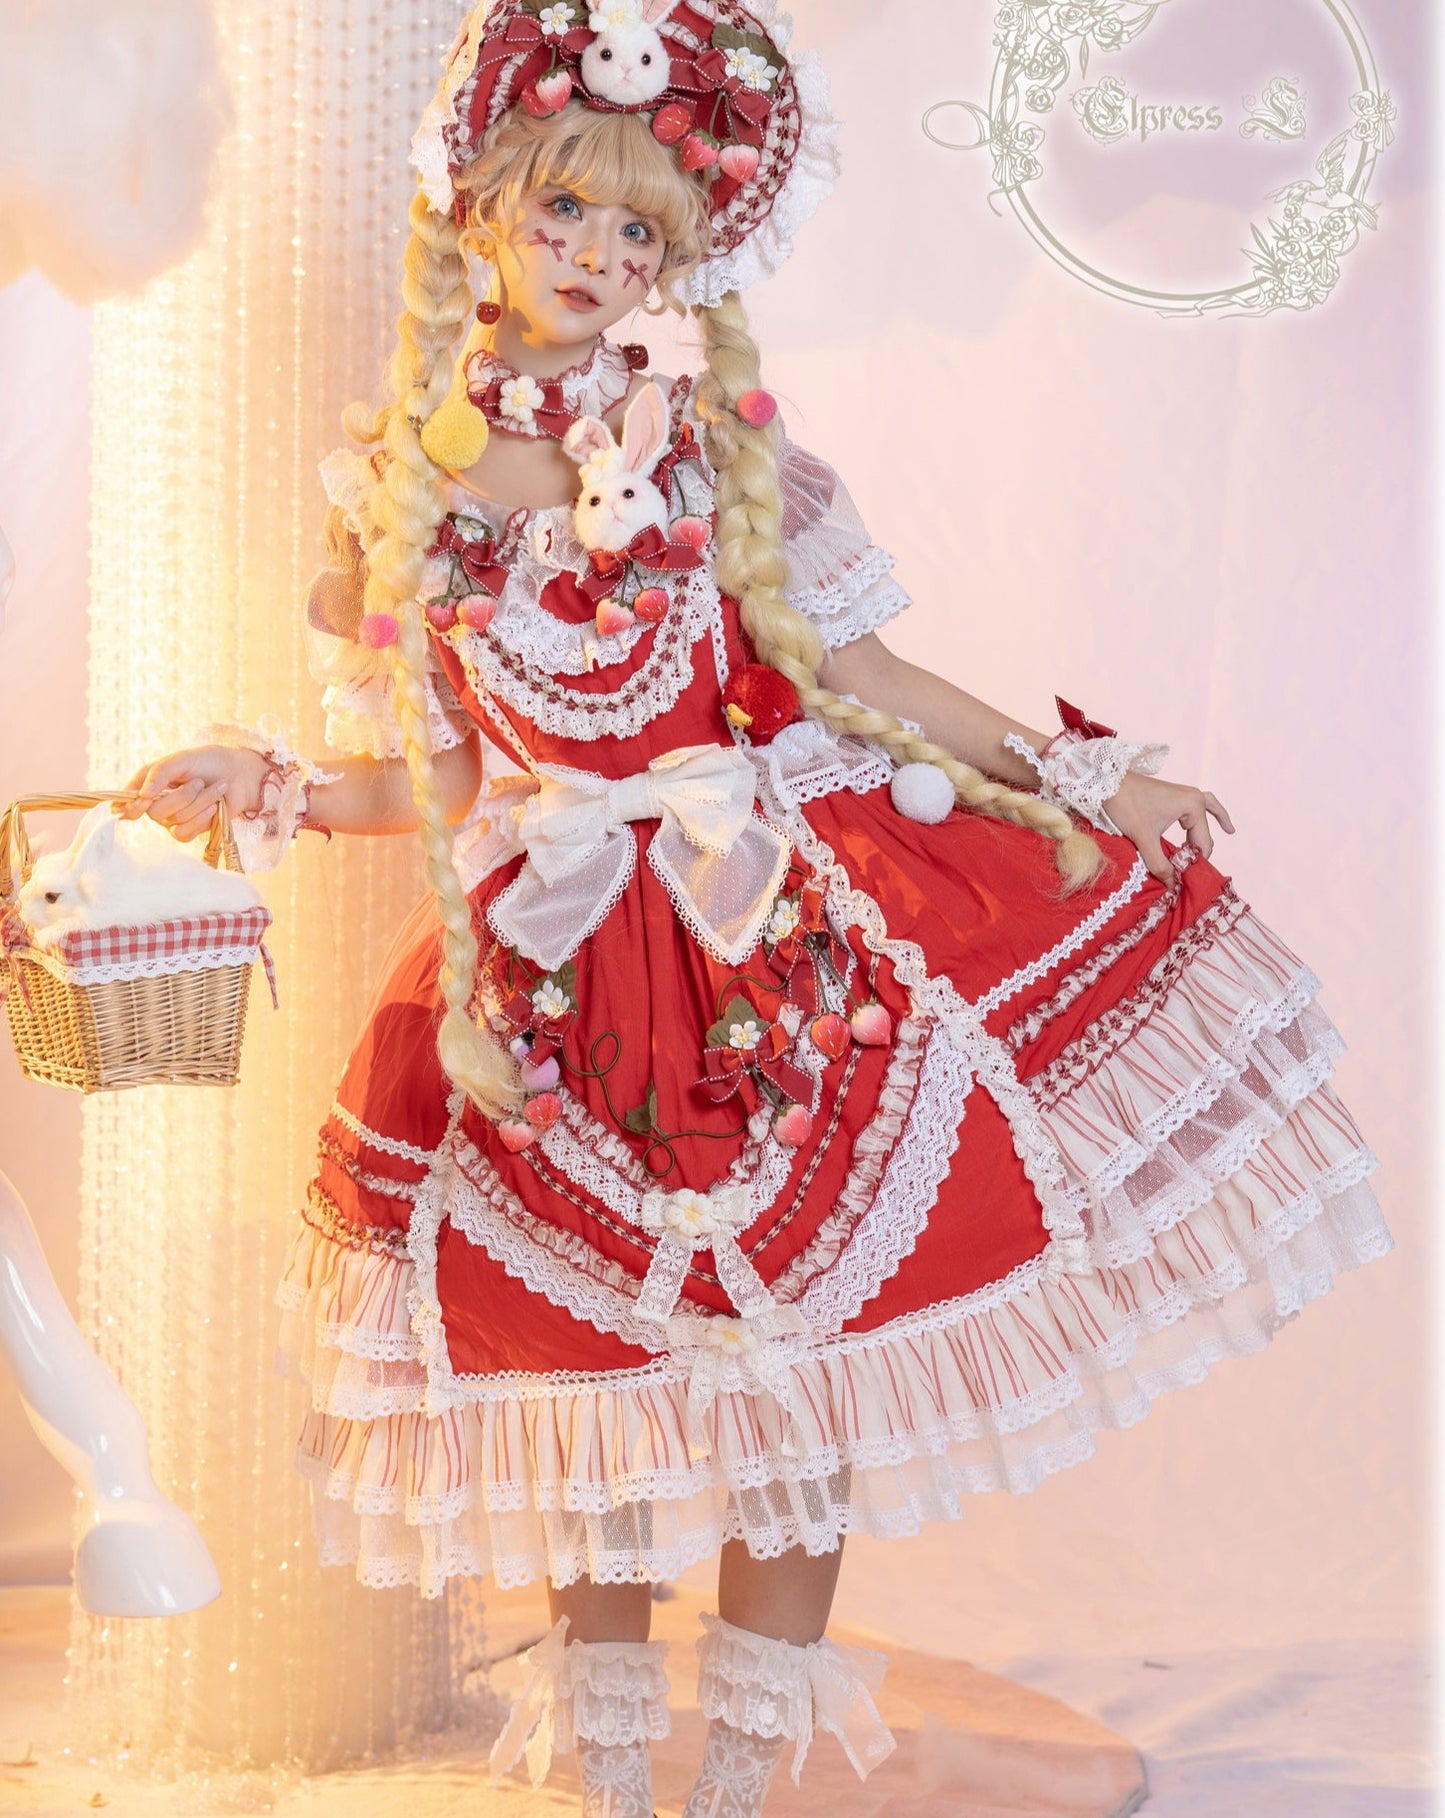 Strawberry princess dress with ruffles and ribbons in 4 colors